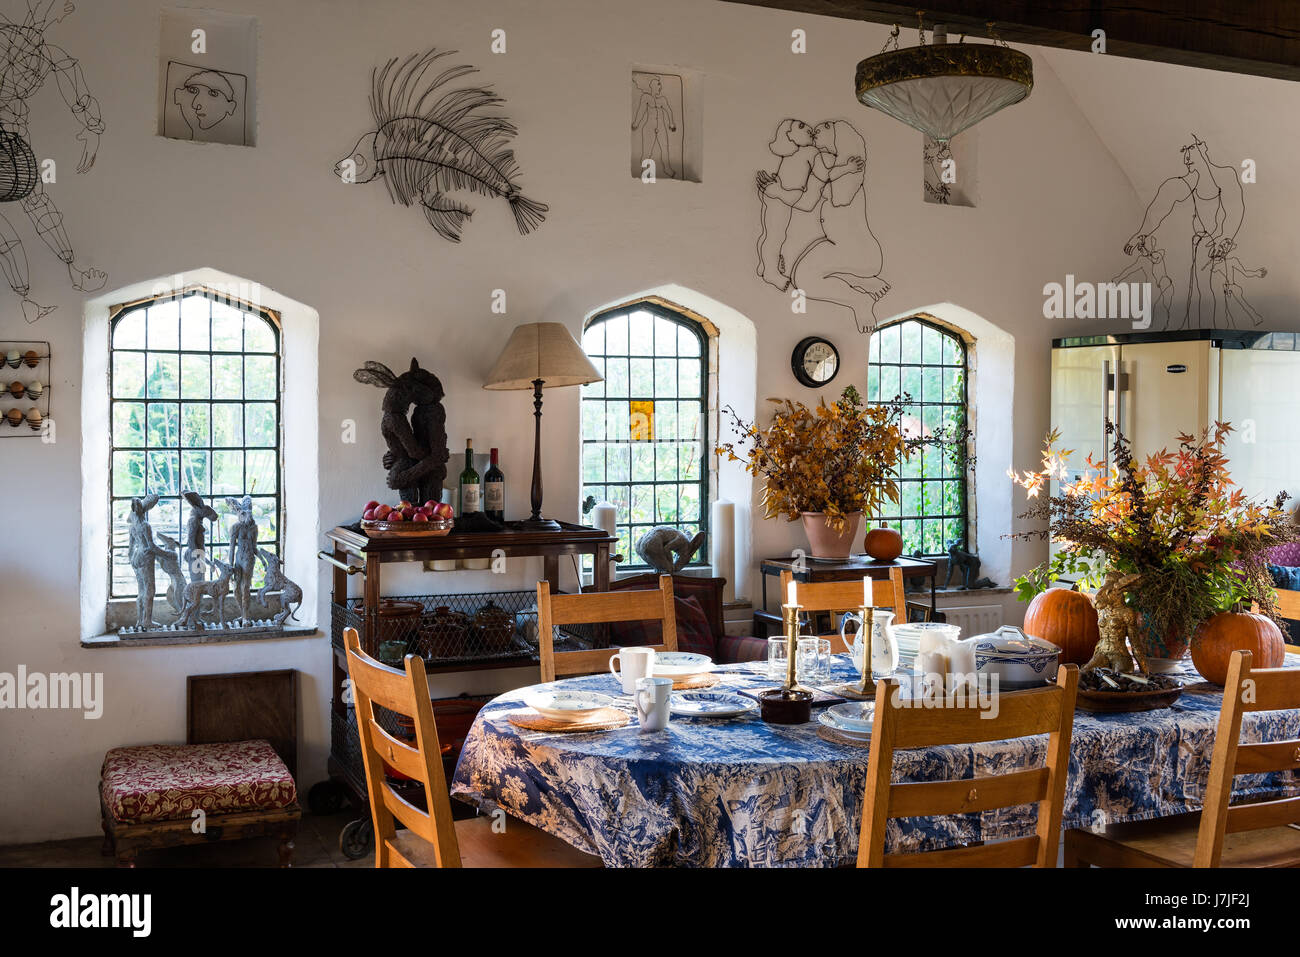 Rustic feeling large kitchen dining room adorned with Sophie Ryder wire sculptures and bunches of autumn leaves. The windows are arched giving the spa Stock Photo